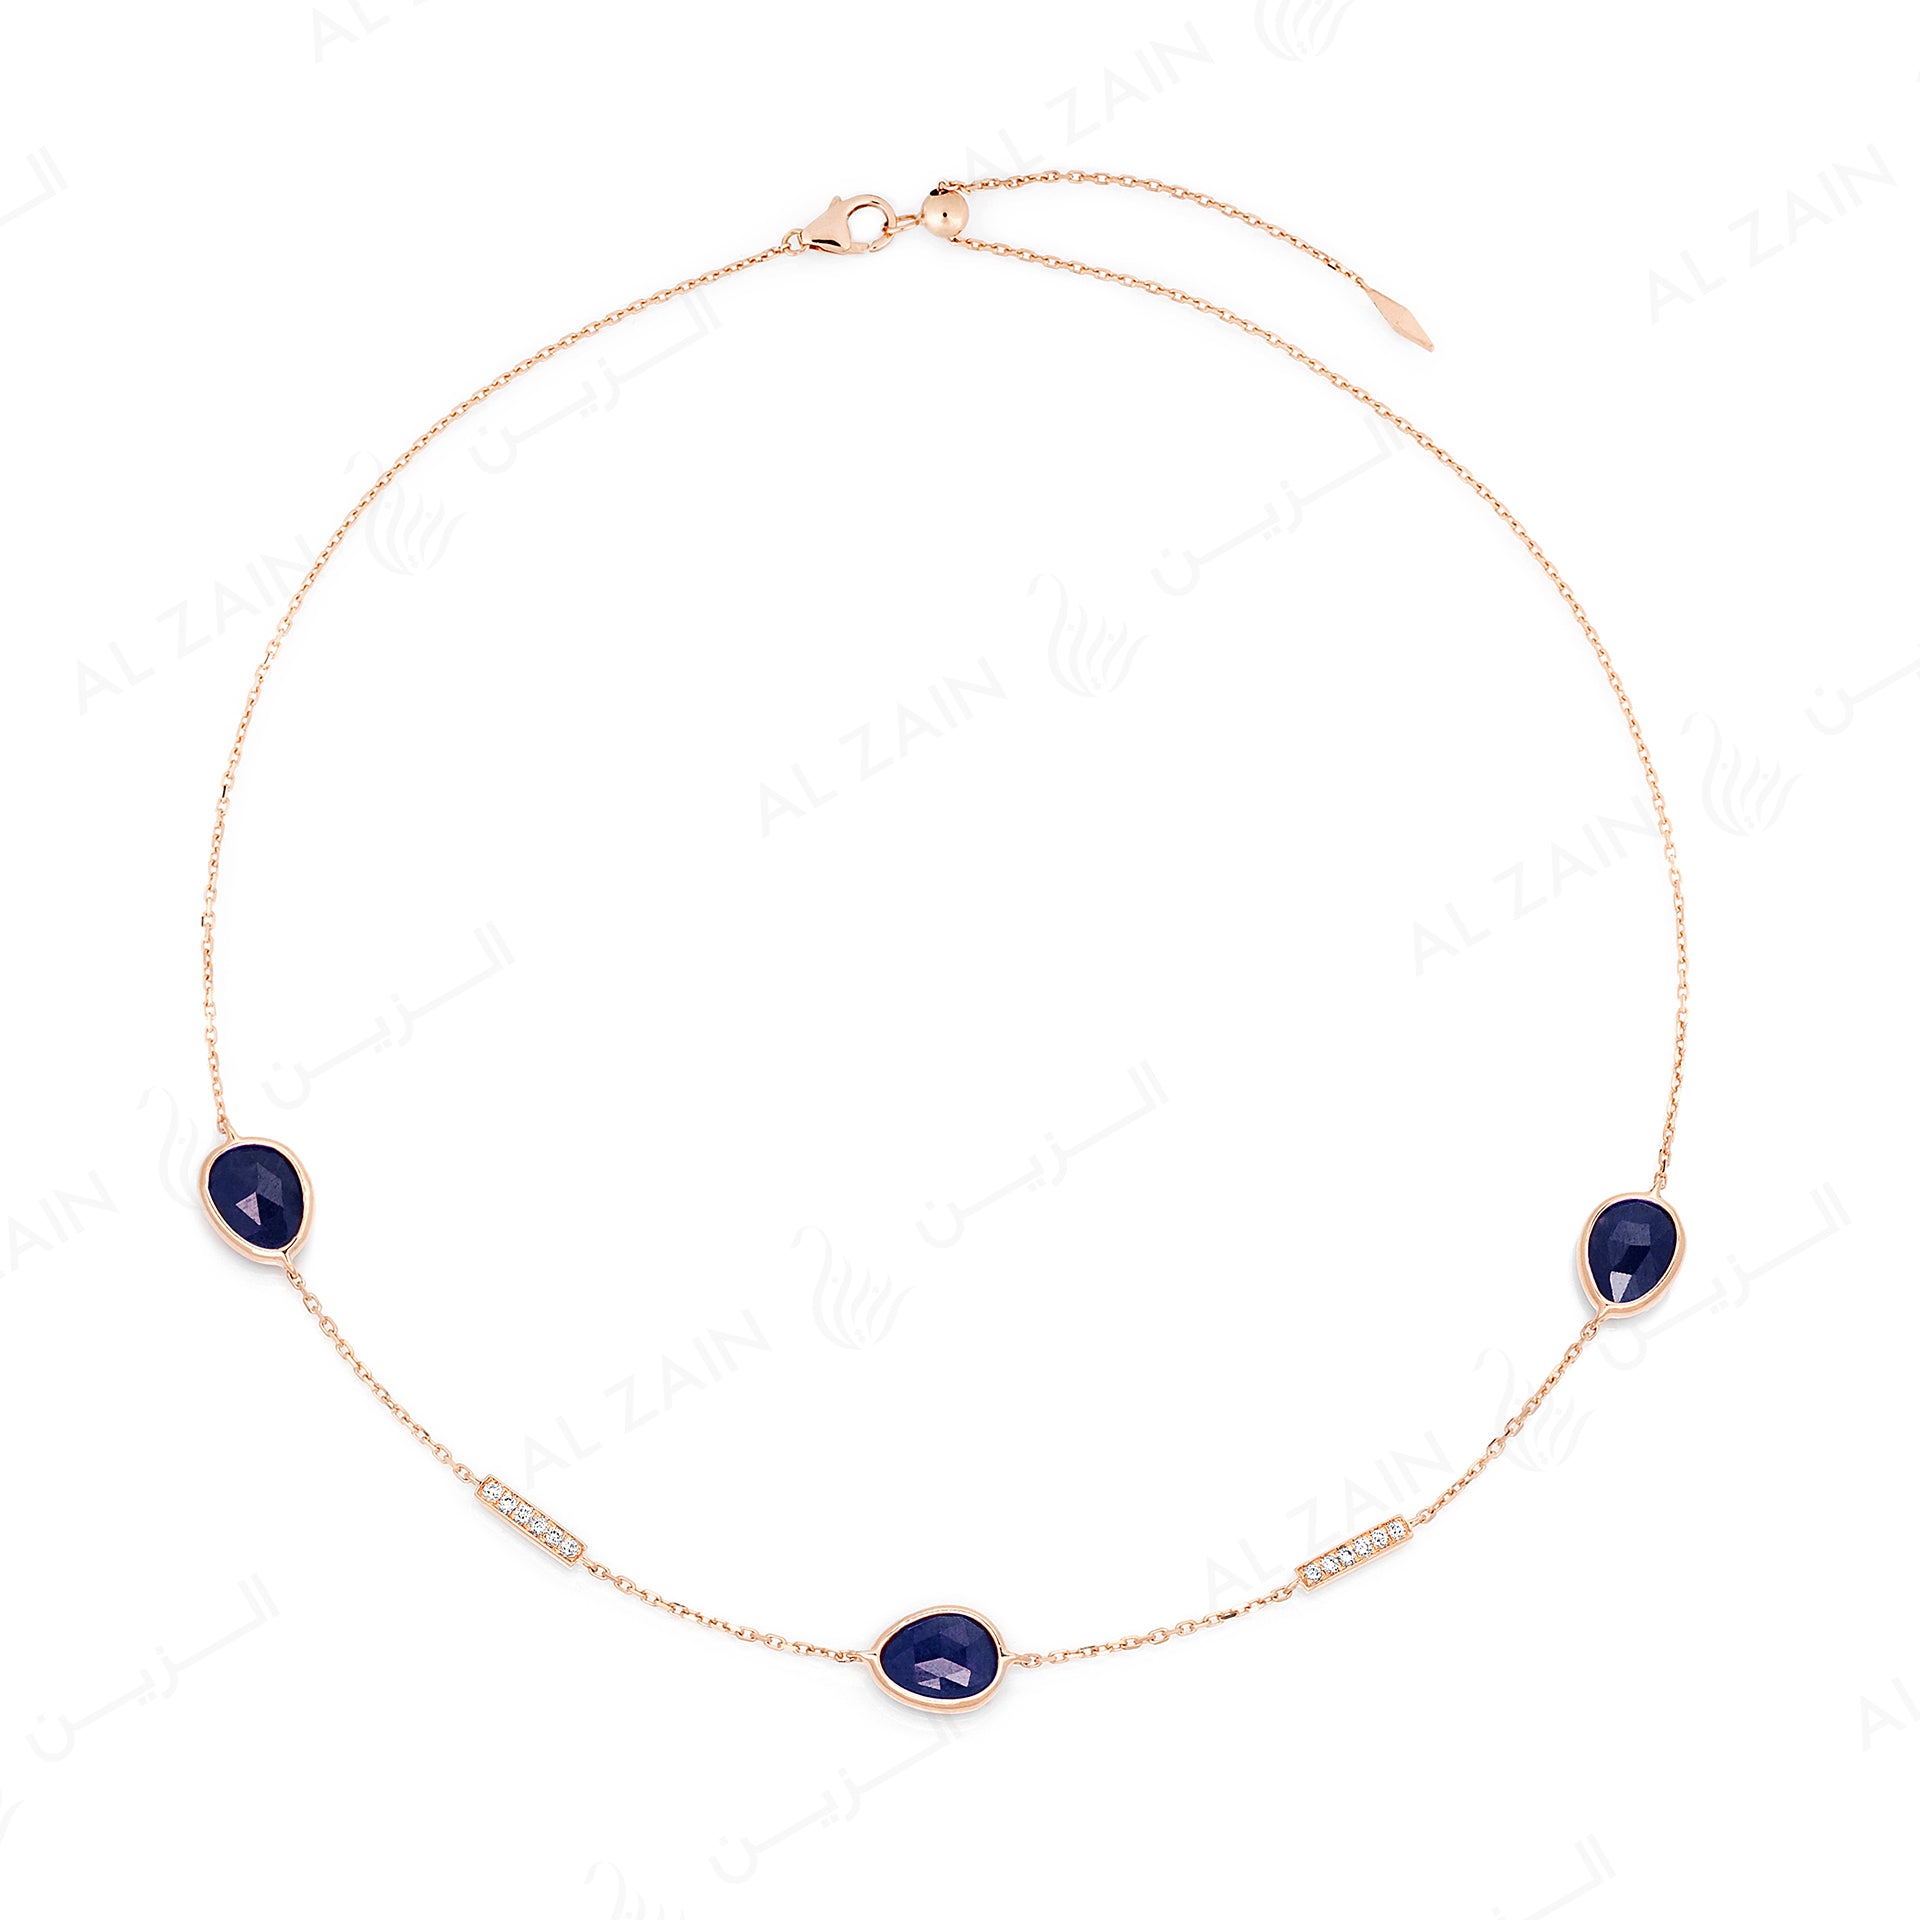 Precious Nina Choker in 18k Rose Gold with Sapphire Stones and Diamonds